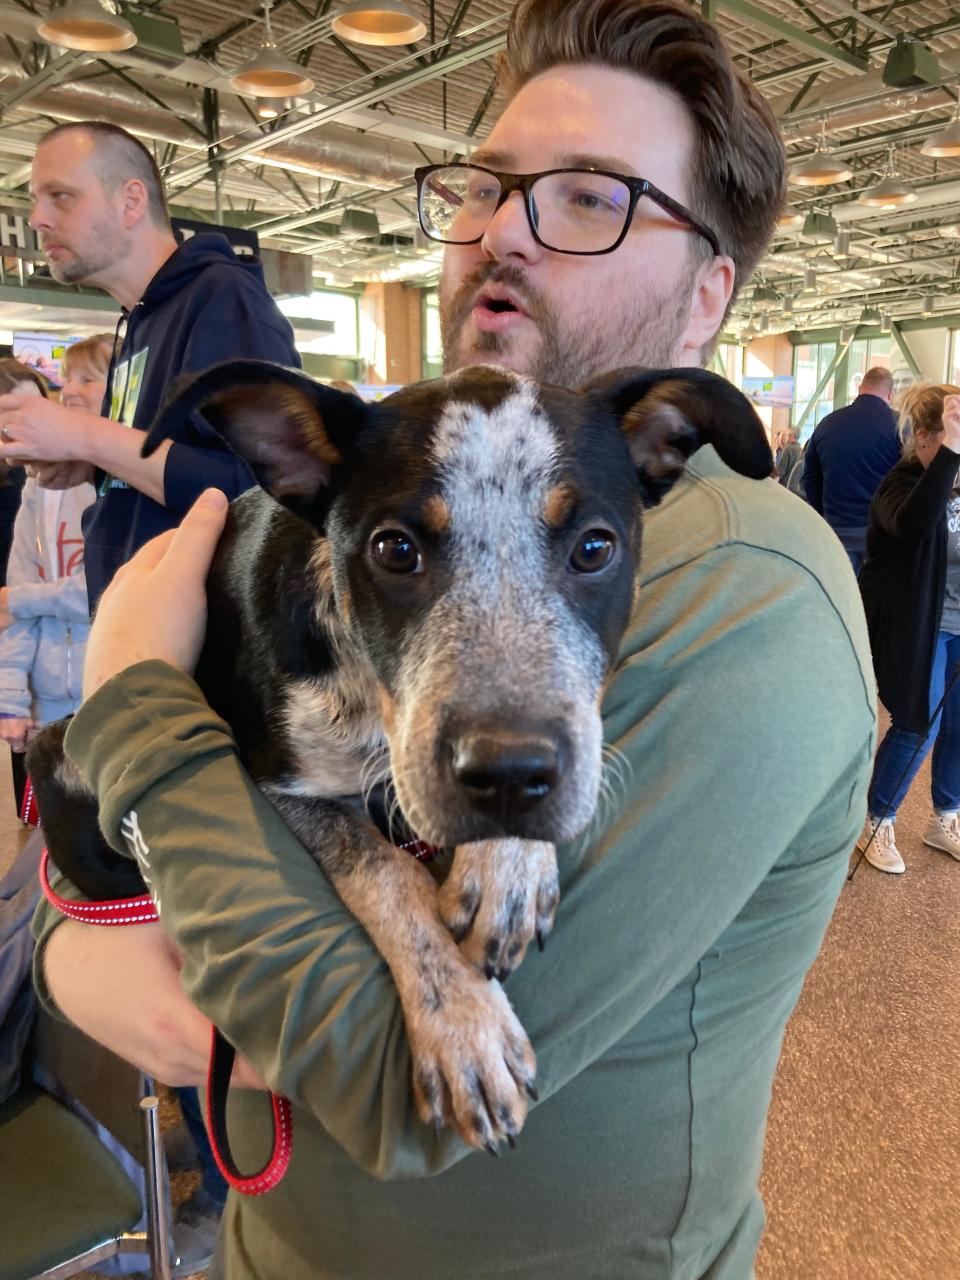 Drew Domalick, a volunteer with Happily Ever After, handed off a very special girl to anyone who looked like they needed to hold a pup. Ellie, the three-month-old blue heeler, will grow to around 150 pounds by adulthood, so she's getting all the cradling she can in now at Johnsonville Tailgate Village in Ashwaubenon, Wis.